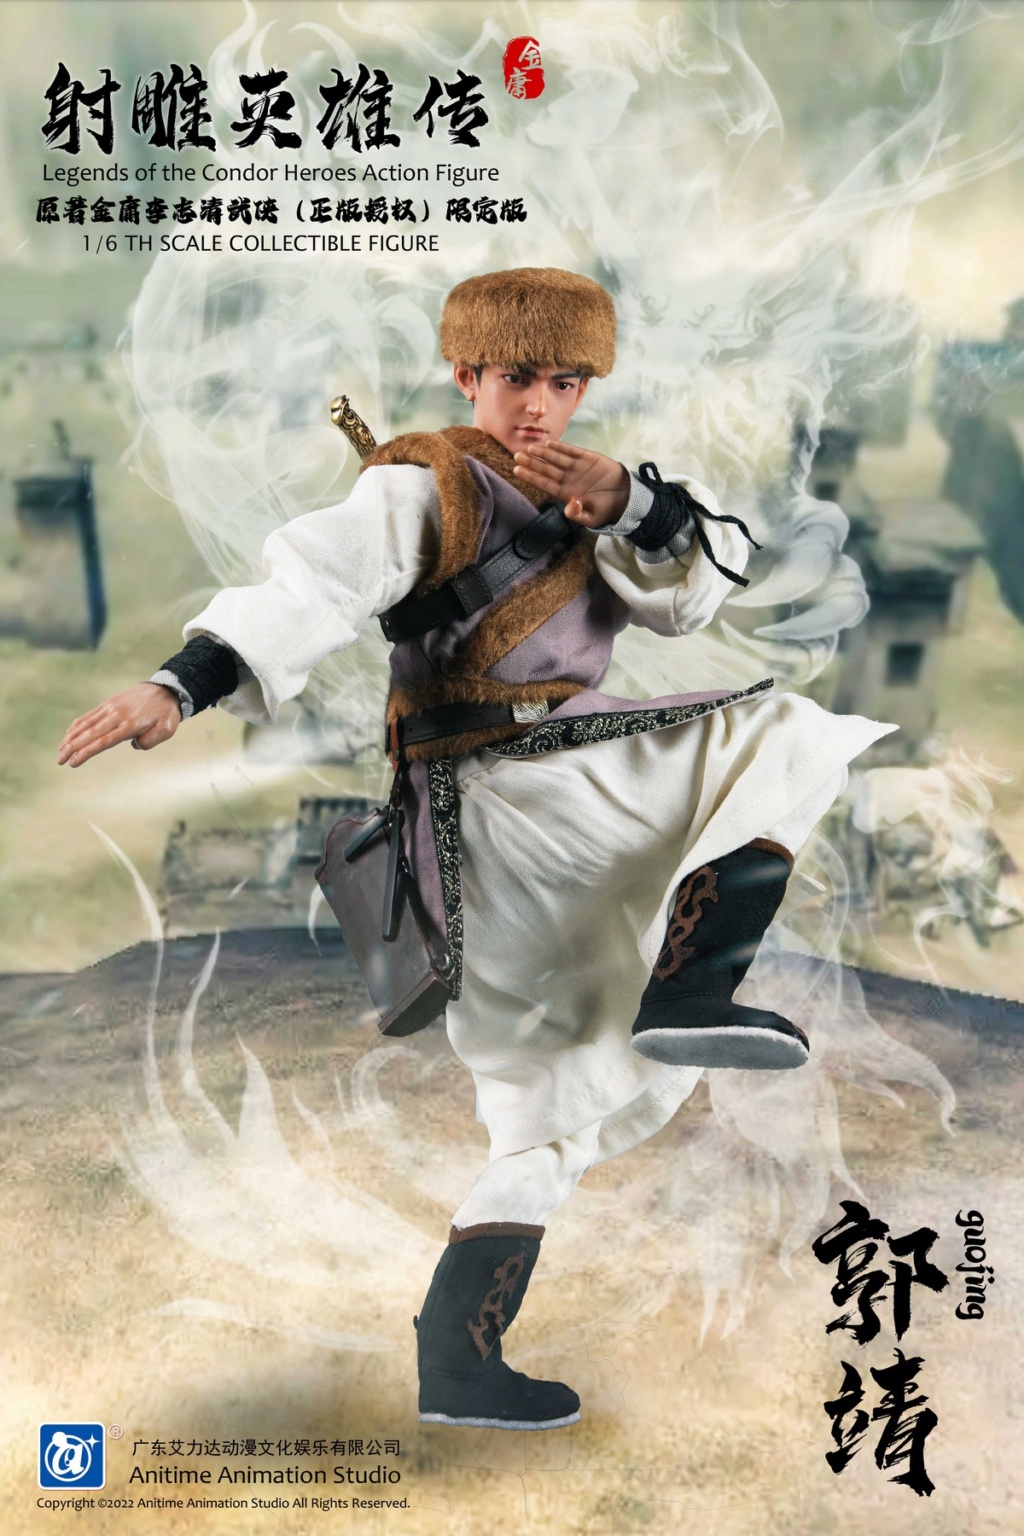 Male - NEW PRODUCT: Ailida Animation: 1/6 Jin Yong Li Zhiqing (authenticated) Legend of the Condor Heroes Guo Jing 19212910